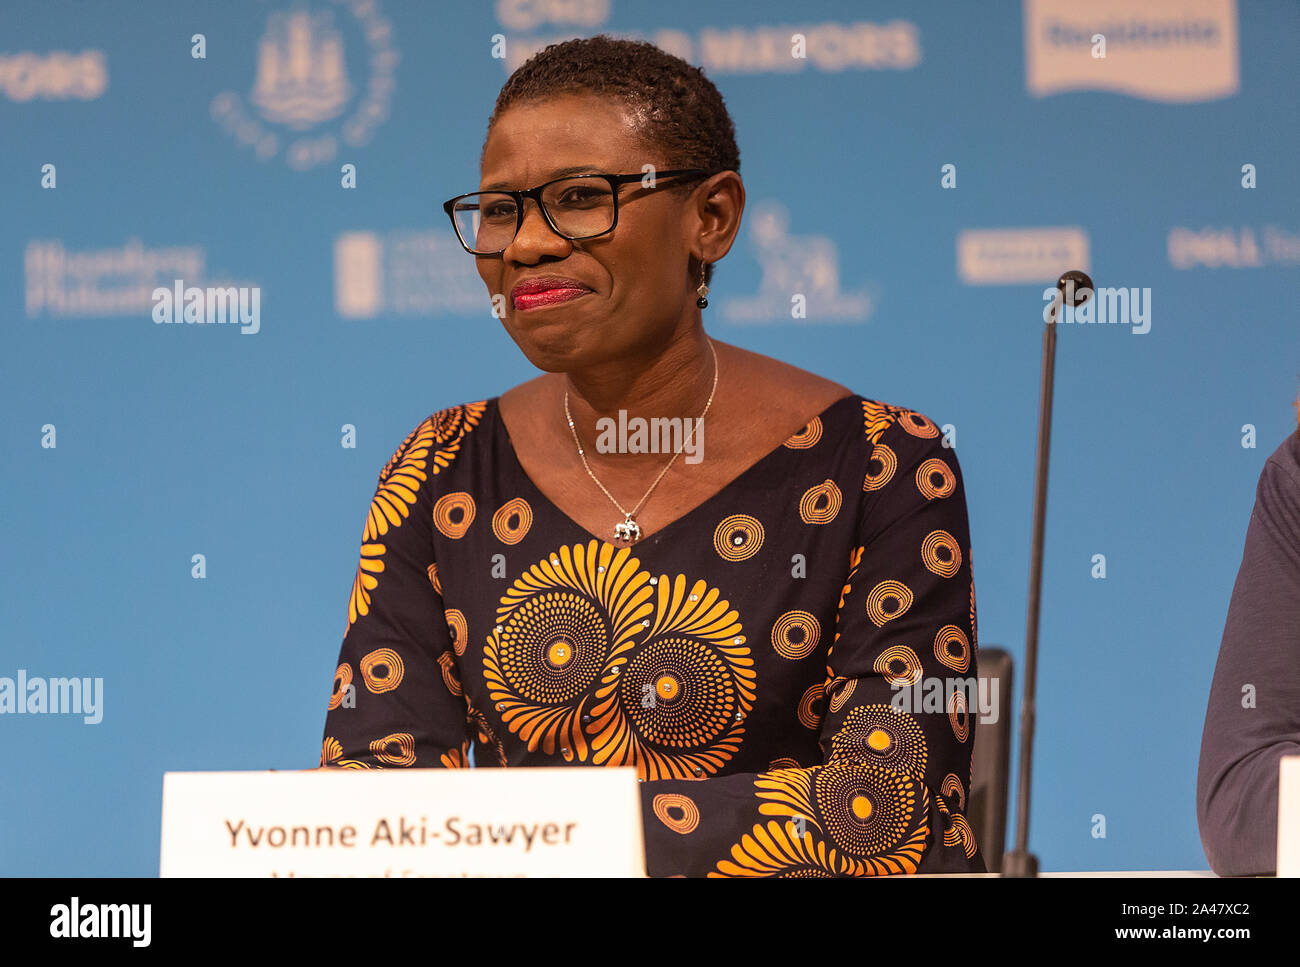 COPENHAGEN, DENMARK – OCTOBER 11:  Yvonne Aki-Sawyer, Mayor of Freetown, Sierra Leone, during the ‘Mayors and Youth Activist’ press conference at the C40 World Mayors Summit. During the press conference young activist explained what they expect of the grown-up politicians. More than 90 mayors of some of the world’s largest and most influential cities representing some 700 million people met in Copenhagen from October 9-12 for the C40 World Mayors Summit. The purpose with the summit in Copenhagen was to build a global coalition of leading cities, businesses and citizens that rallies around radi Stock Photo